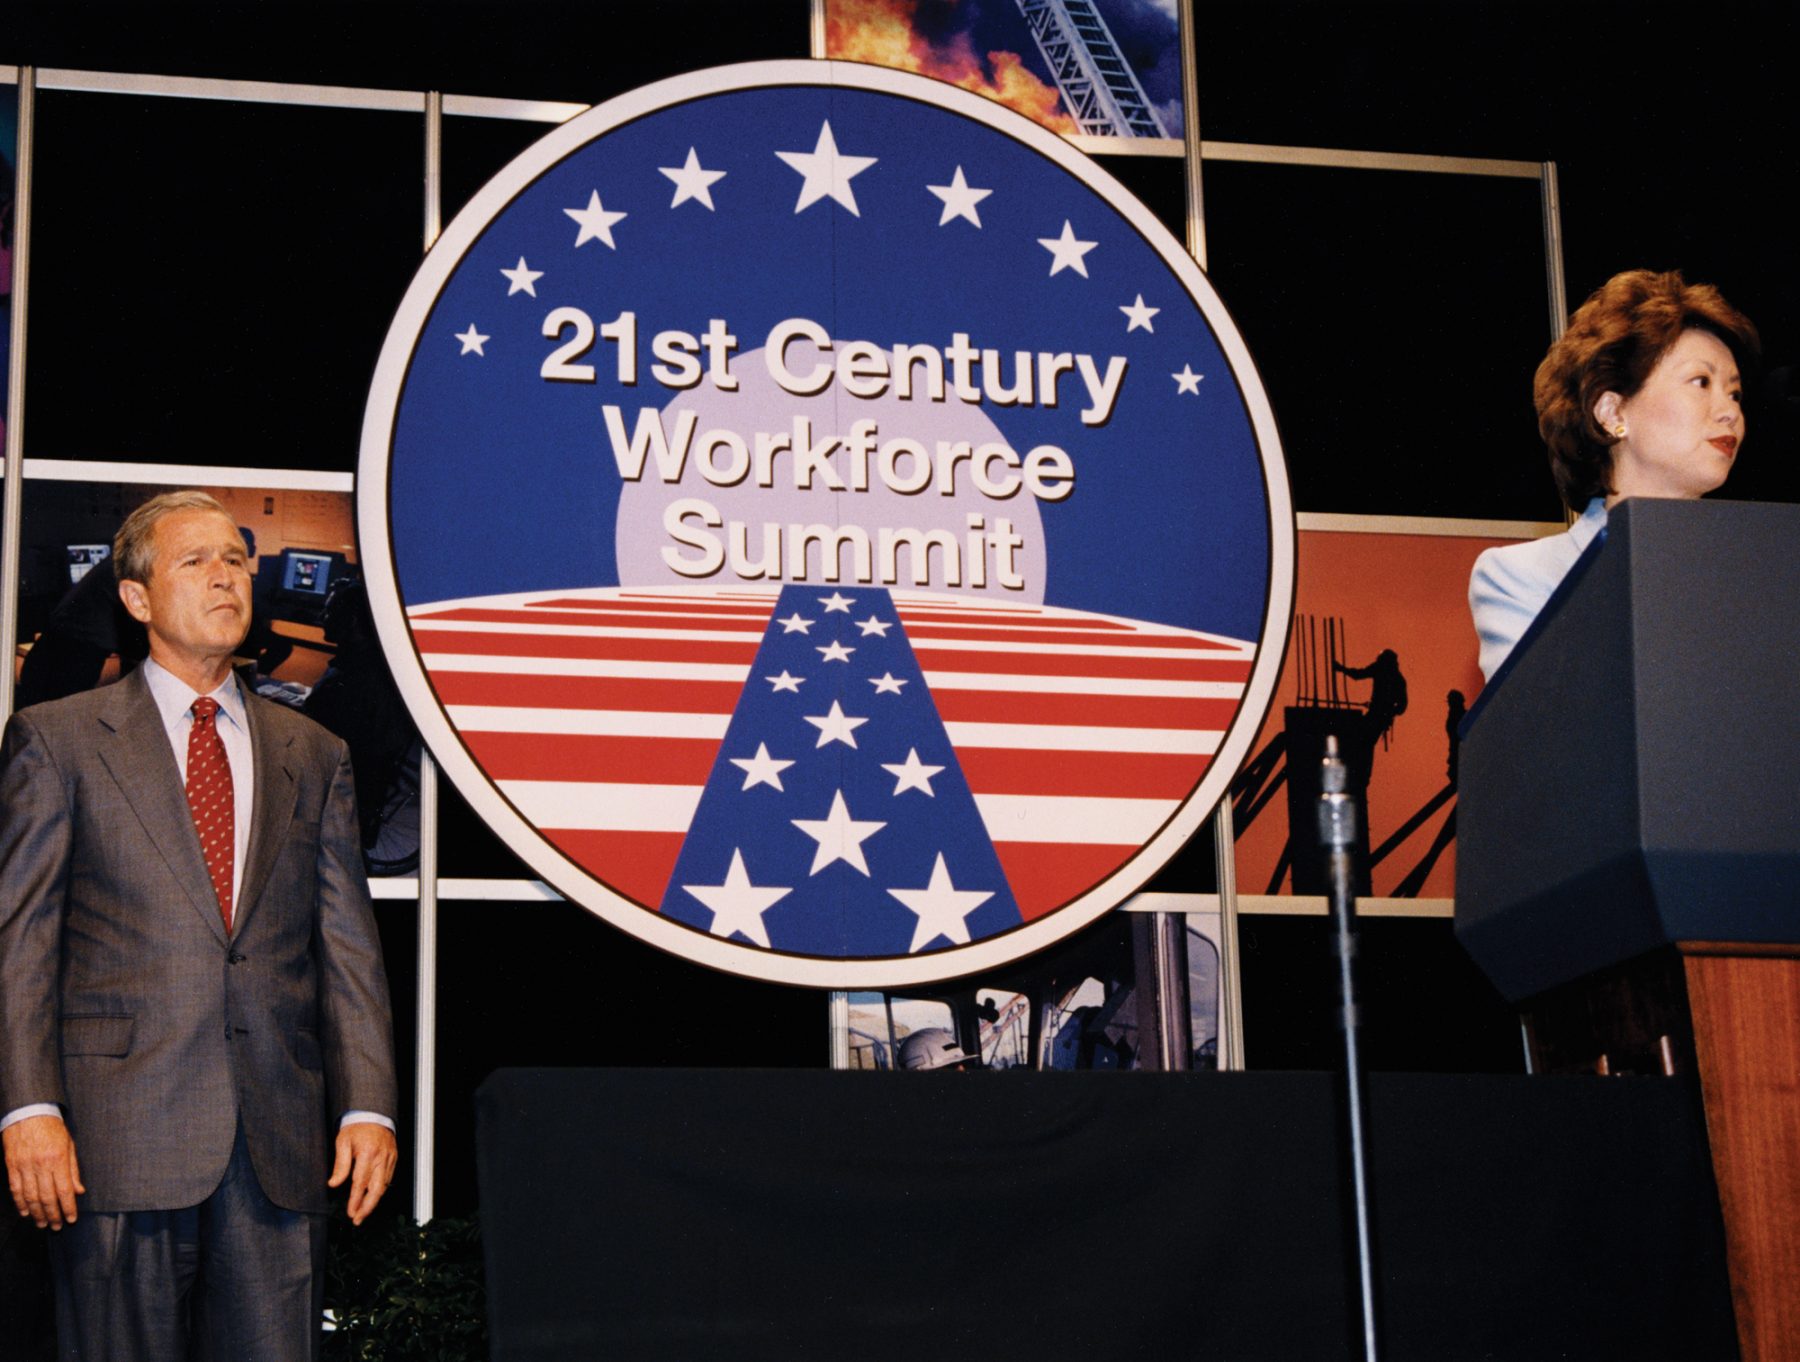 Secretary of Labor Elaine Chao hosts the National Summit on the 21st Century Workforce with President George W. Bush as keynote speaker.